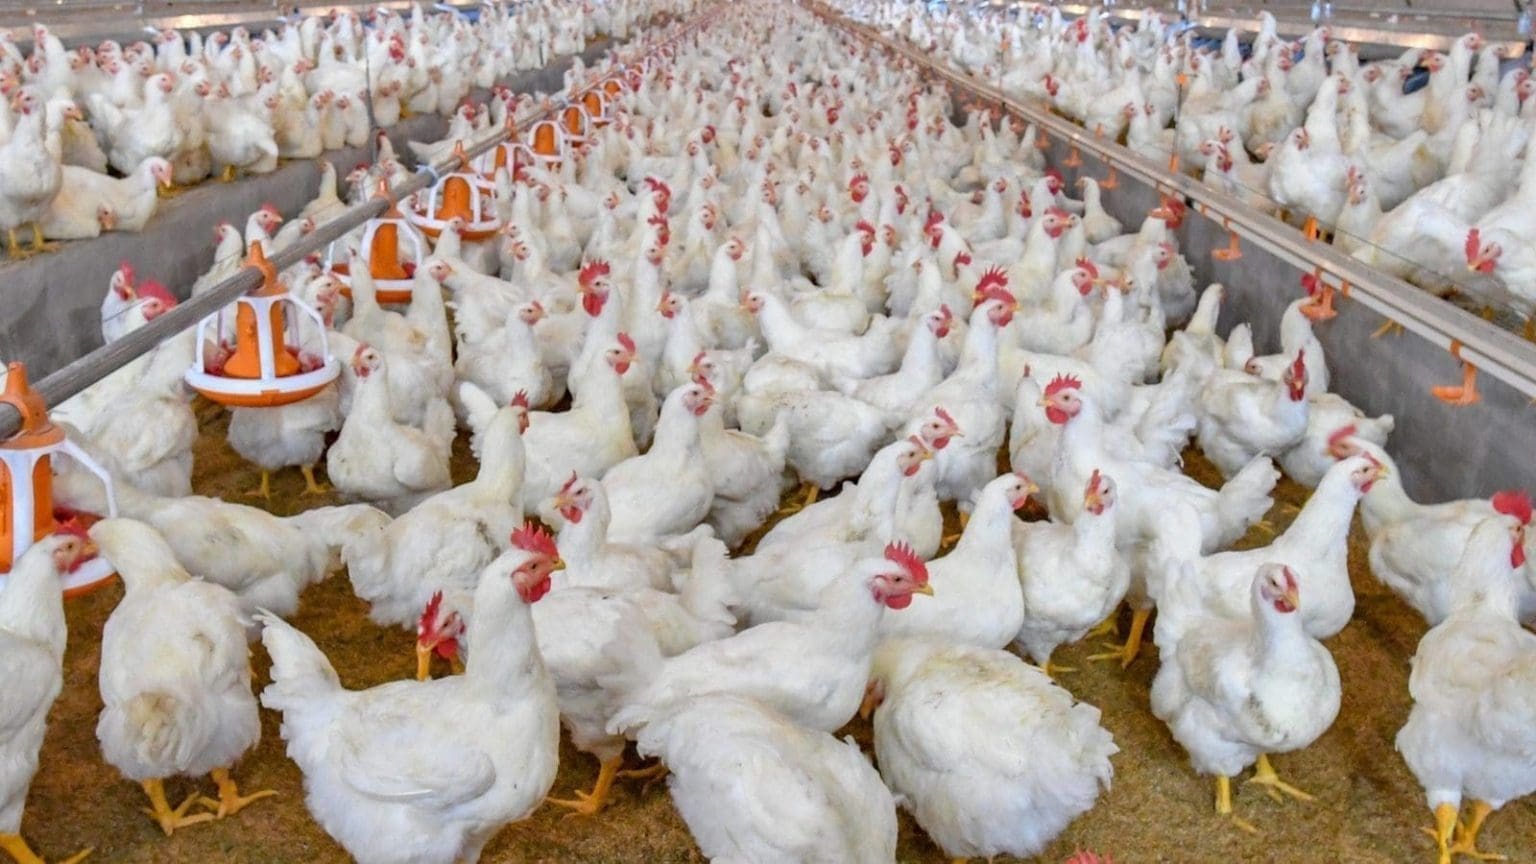 South African poultry industry faces loss as 7.5 million birds culled